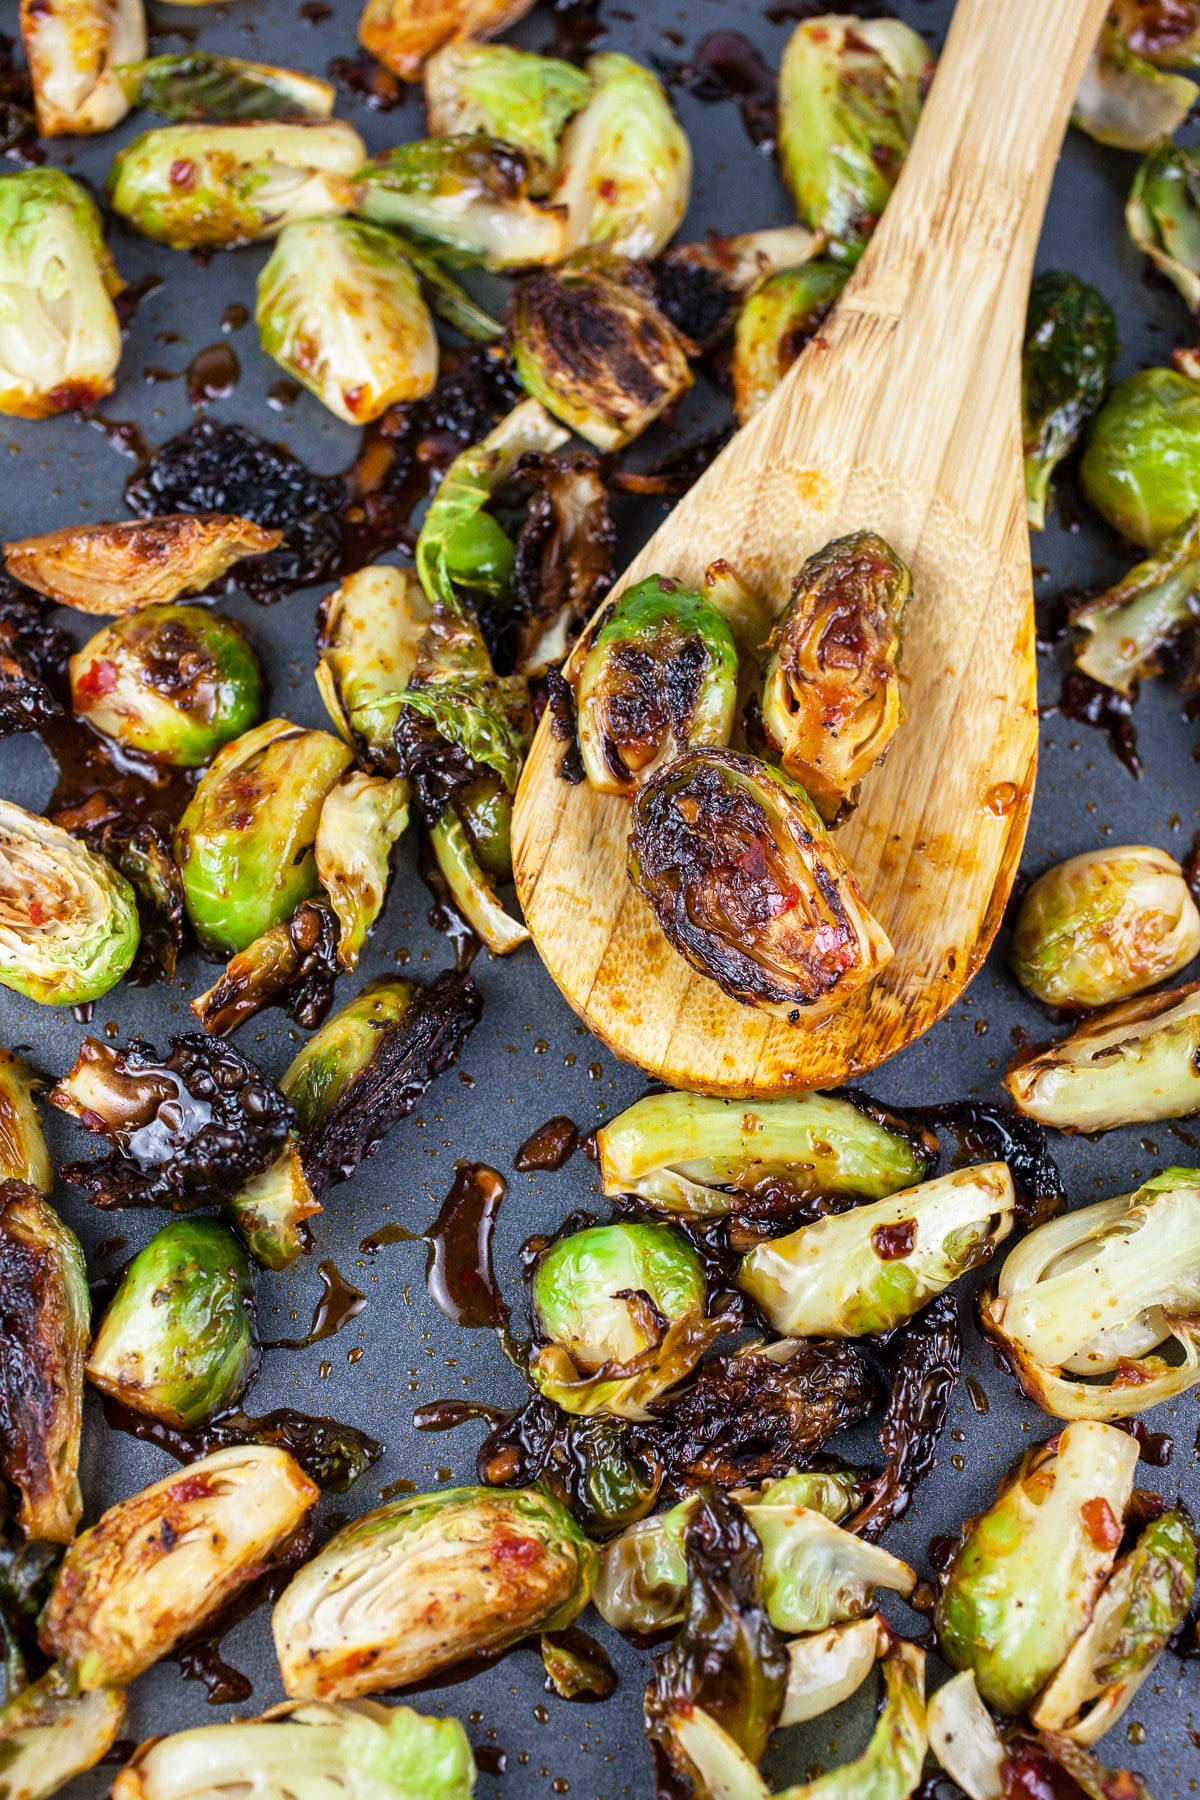 Cooked Asian glazed Brussels sprouts on baking sheet with wooden spoon.